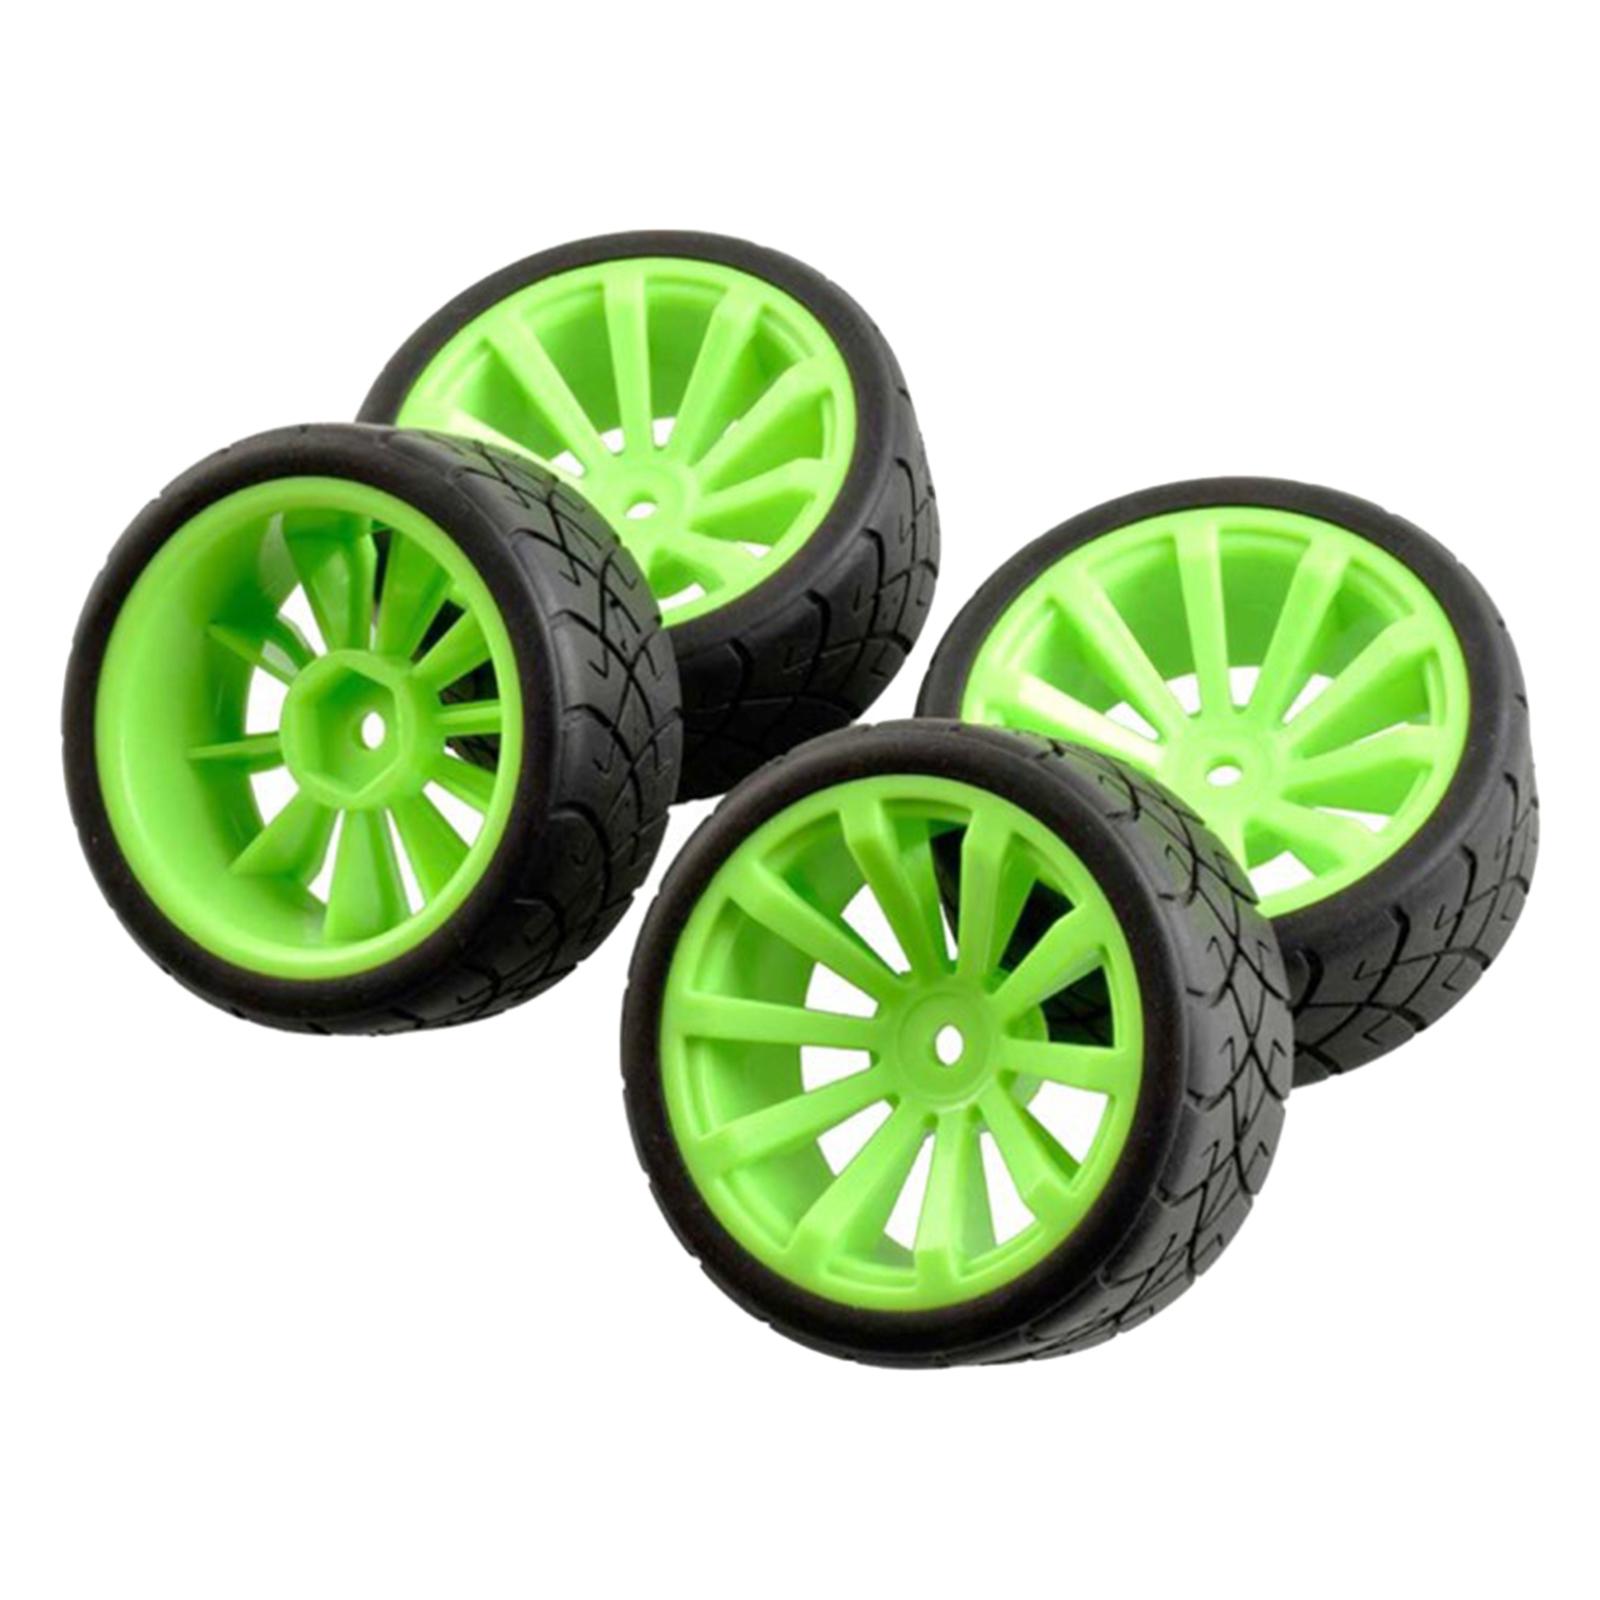 4 Pieces 144001124018124019 for 1:10 Rubber Tire RC Car , Green - image 4 of 7